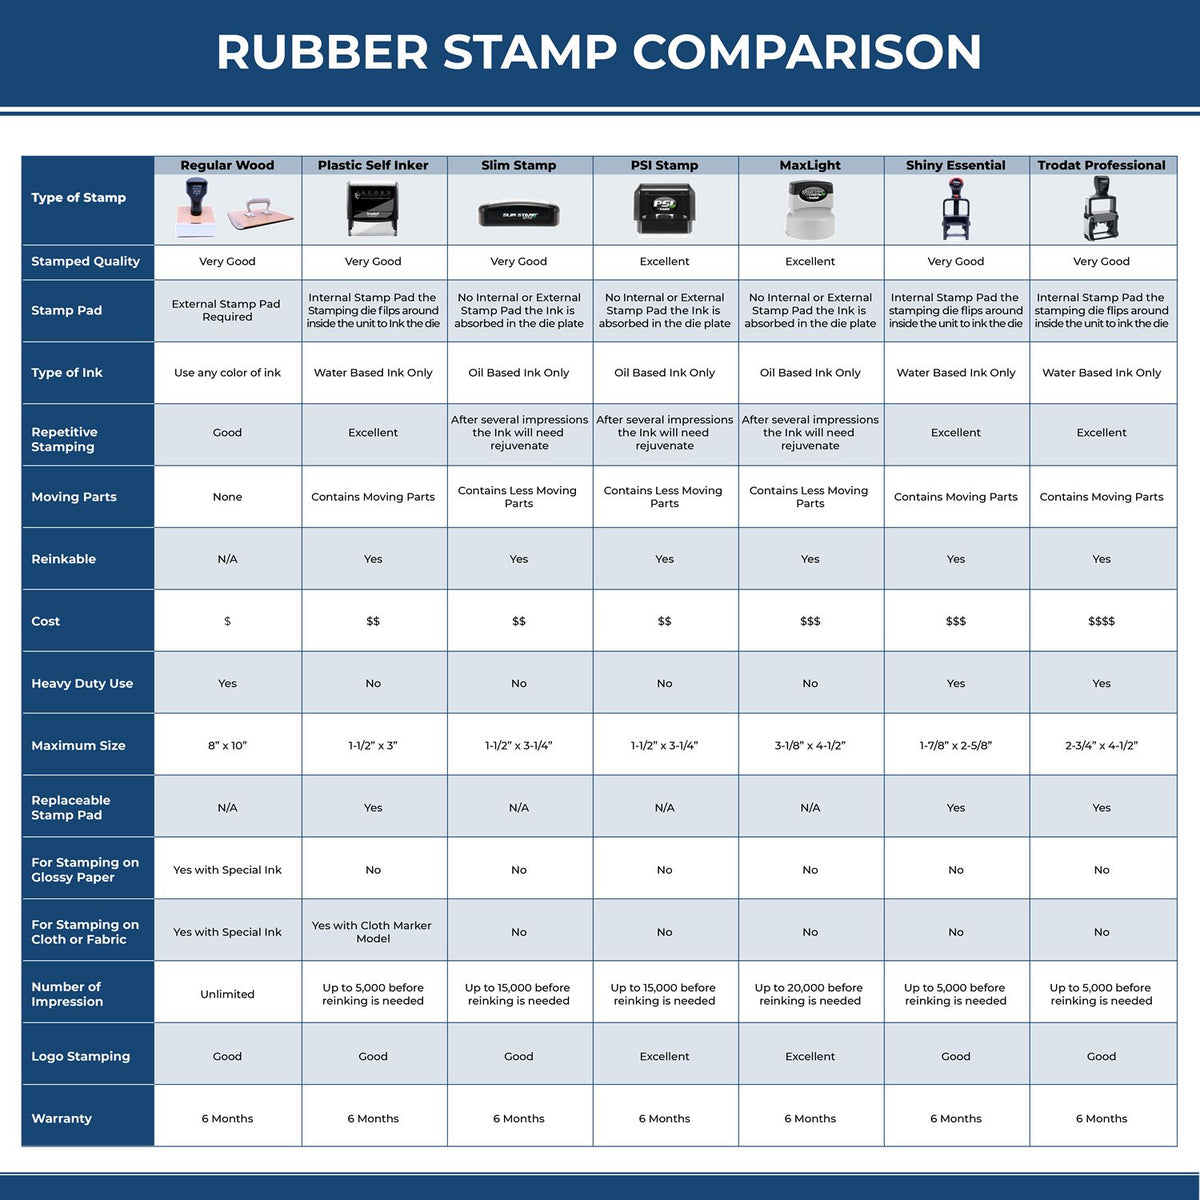 Large Self Inking Appraisal Stamp 4559S Rubber Stamp Comparison